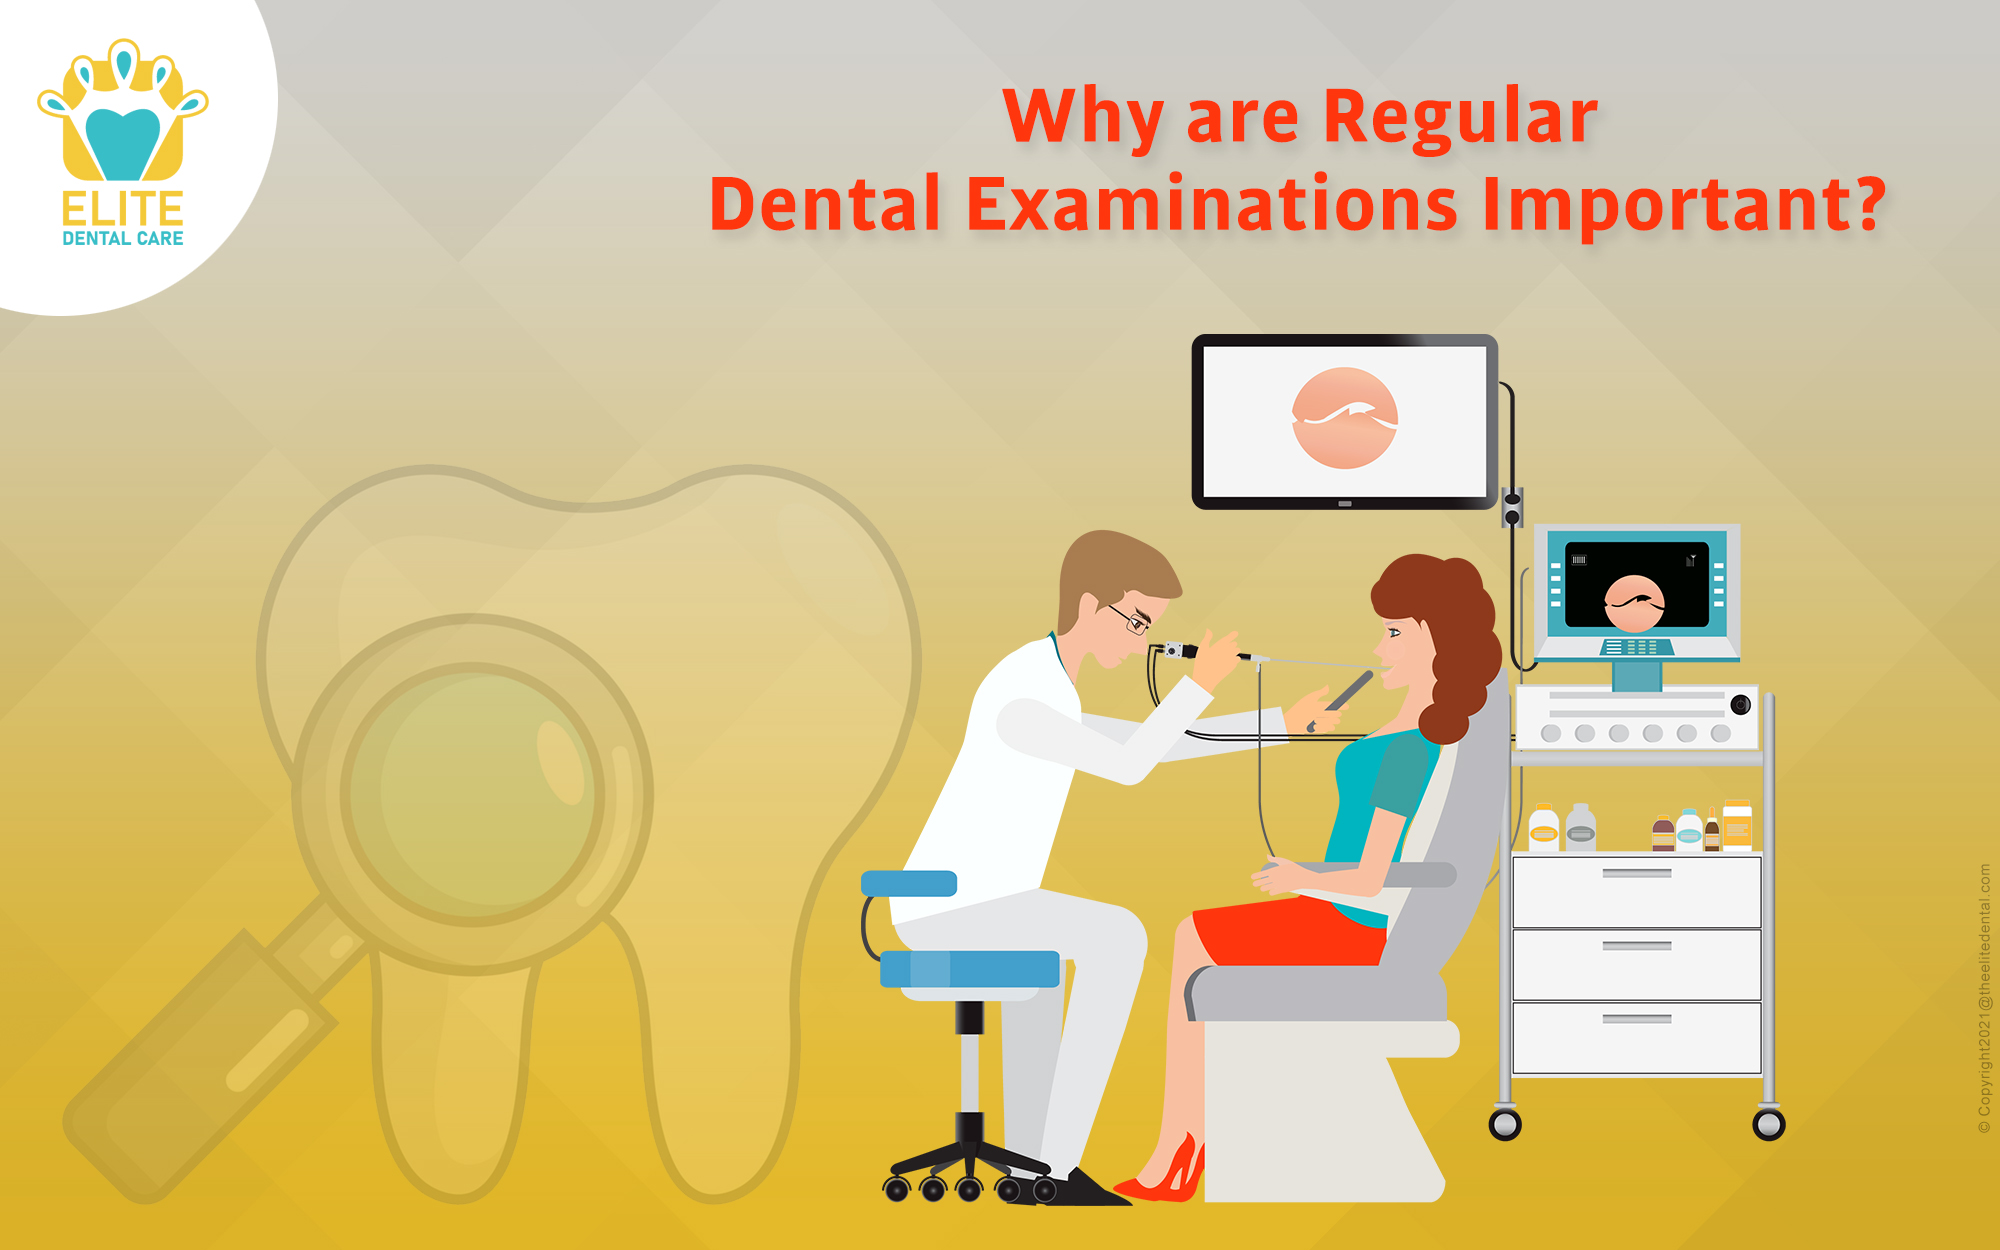 Why Are Regular Dental Examinations Important?